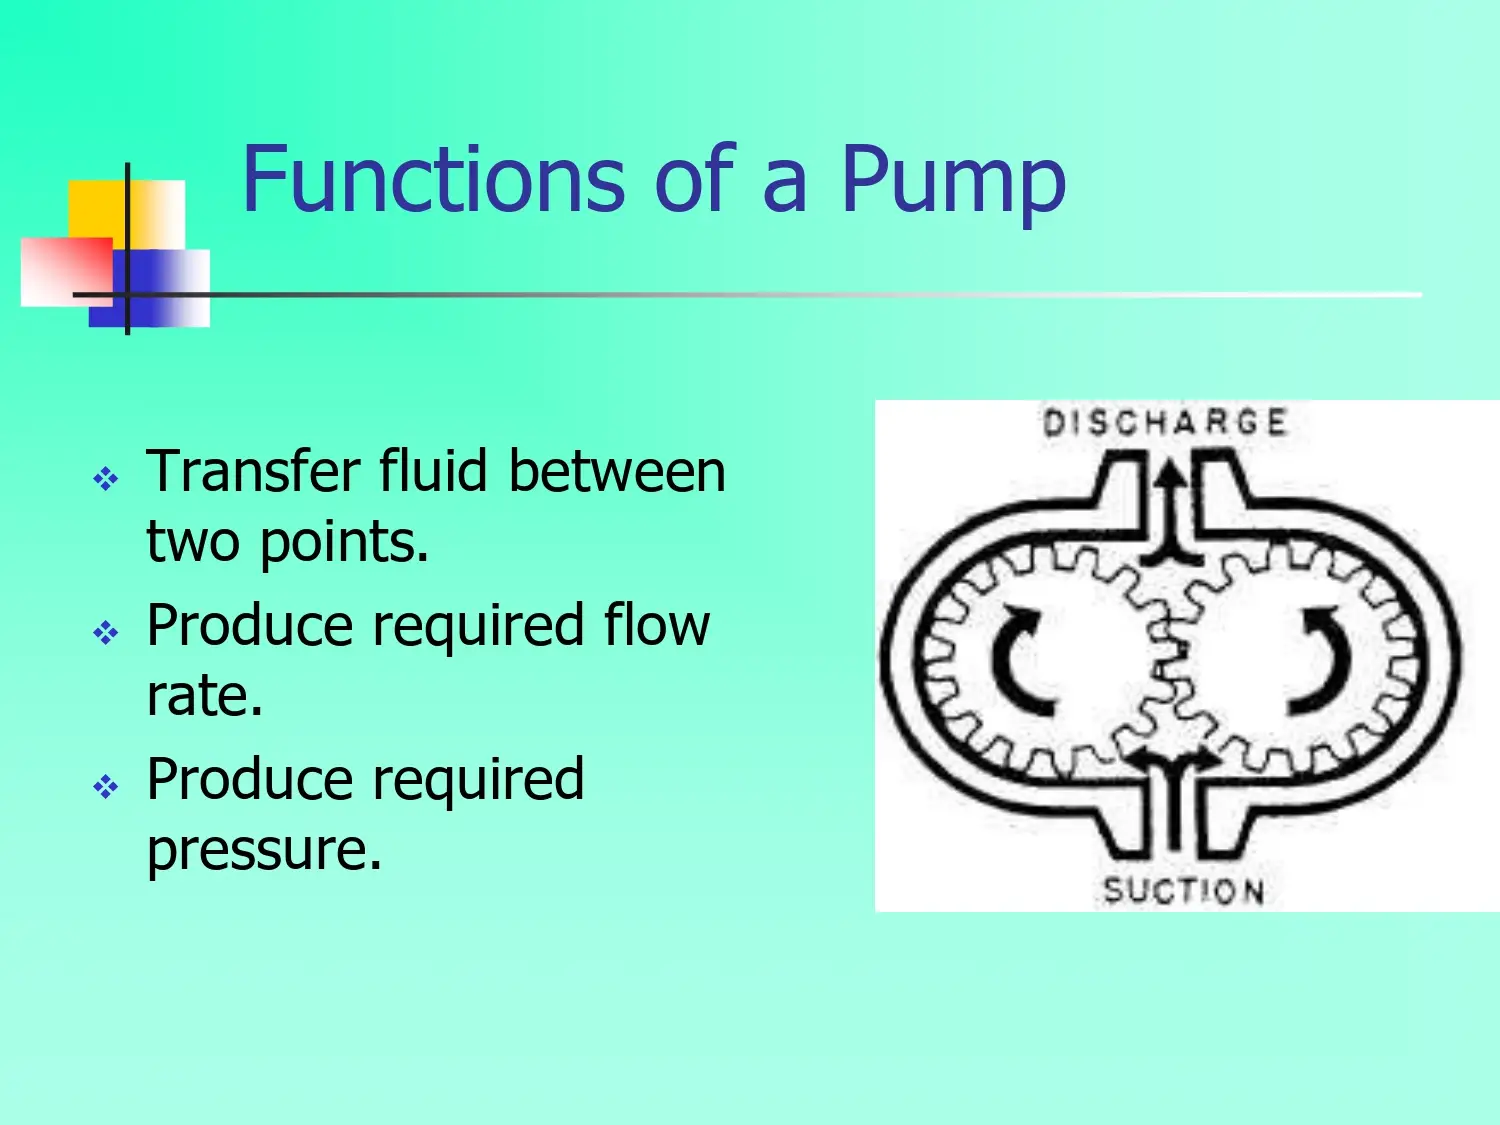 Functions of a Pump